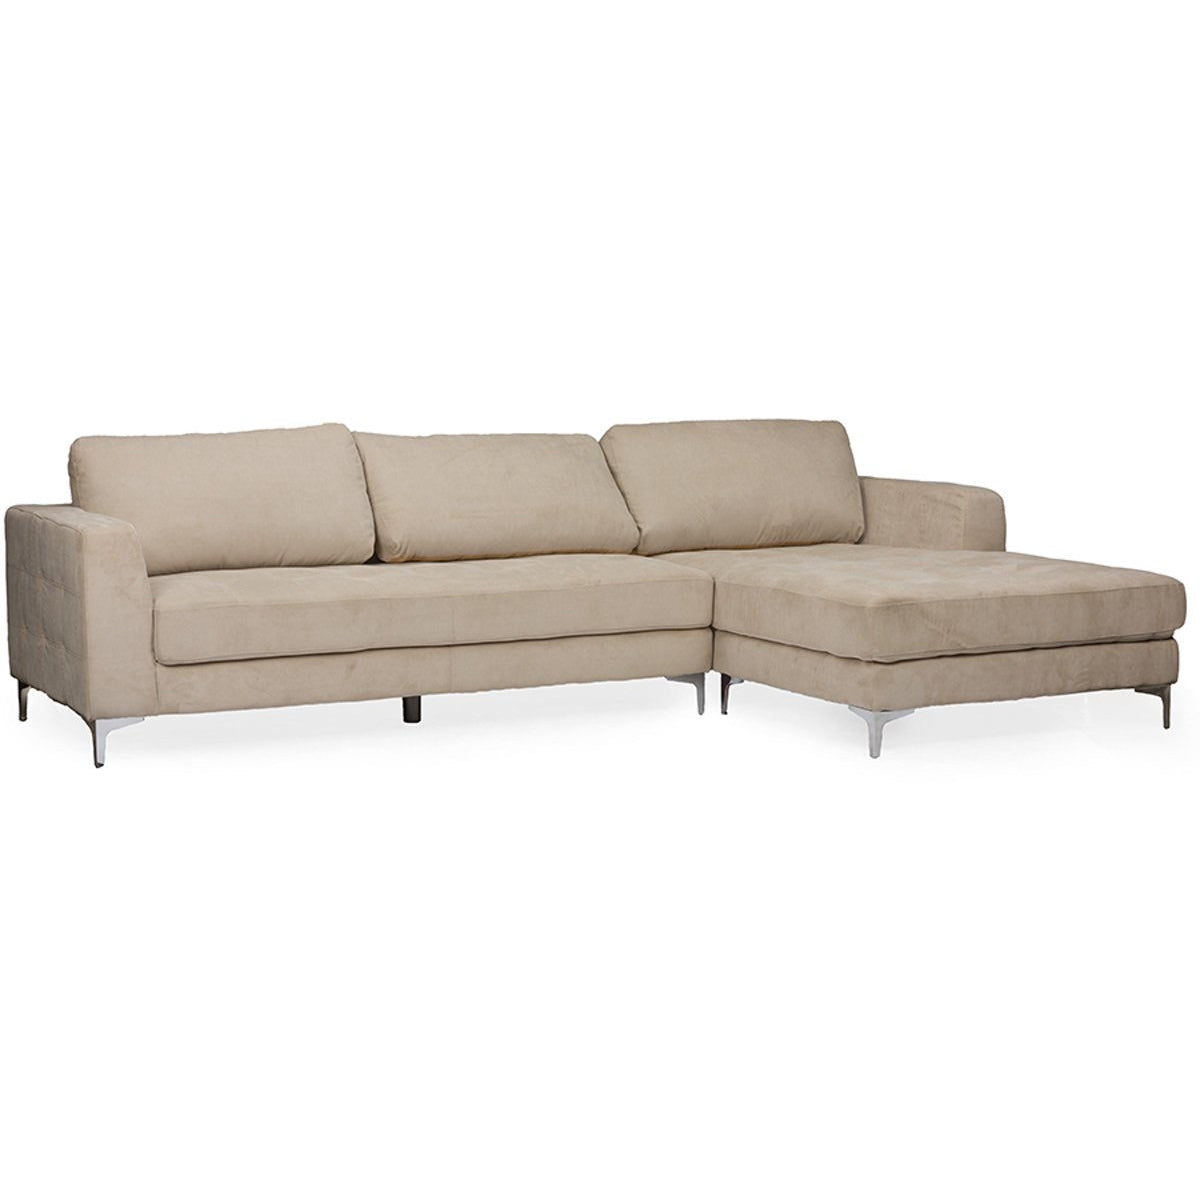 Baxton Studio Agnew Contemporary Light Beige Microfiber Right Facing Sectional Sofa Baxton Studio-sectionals-Minimal And Modern - 2